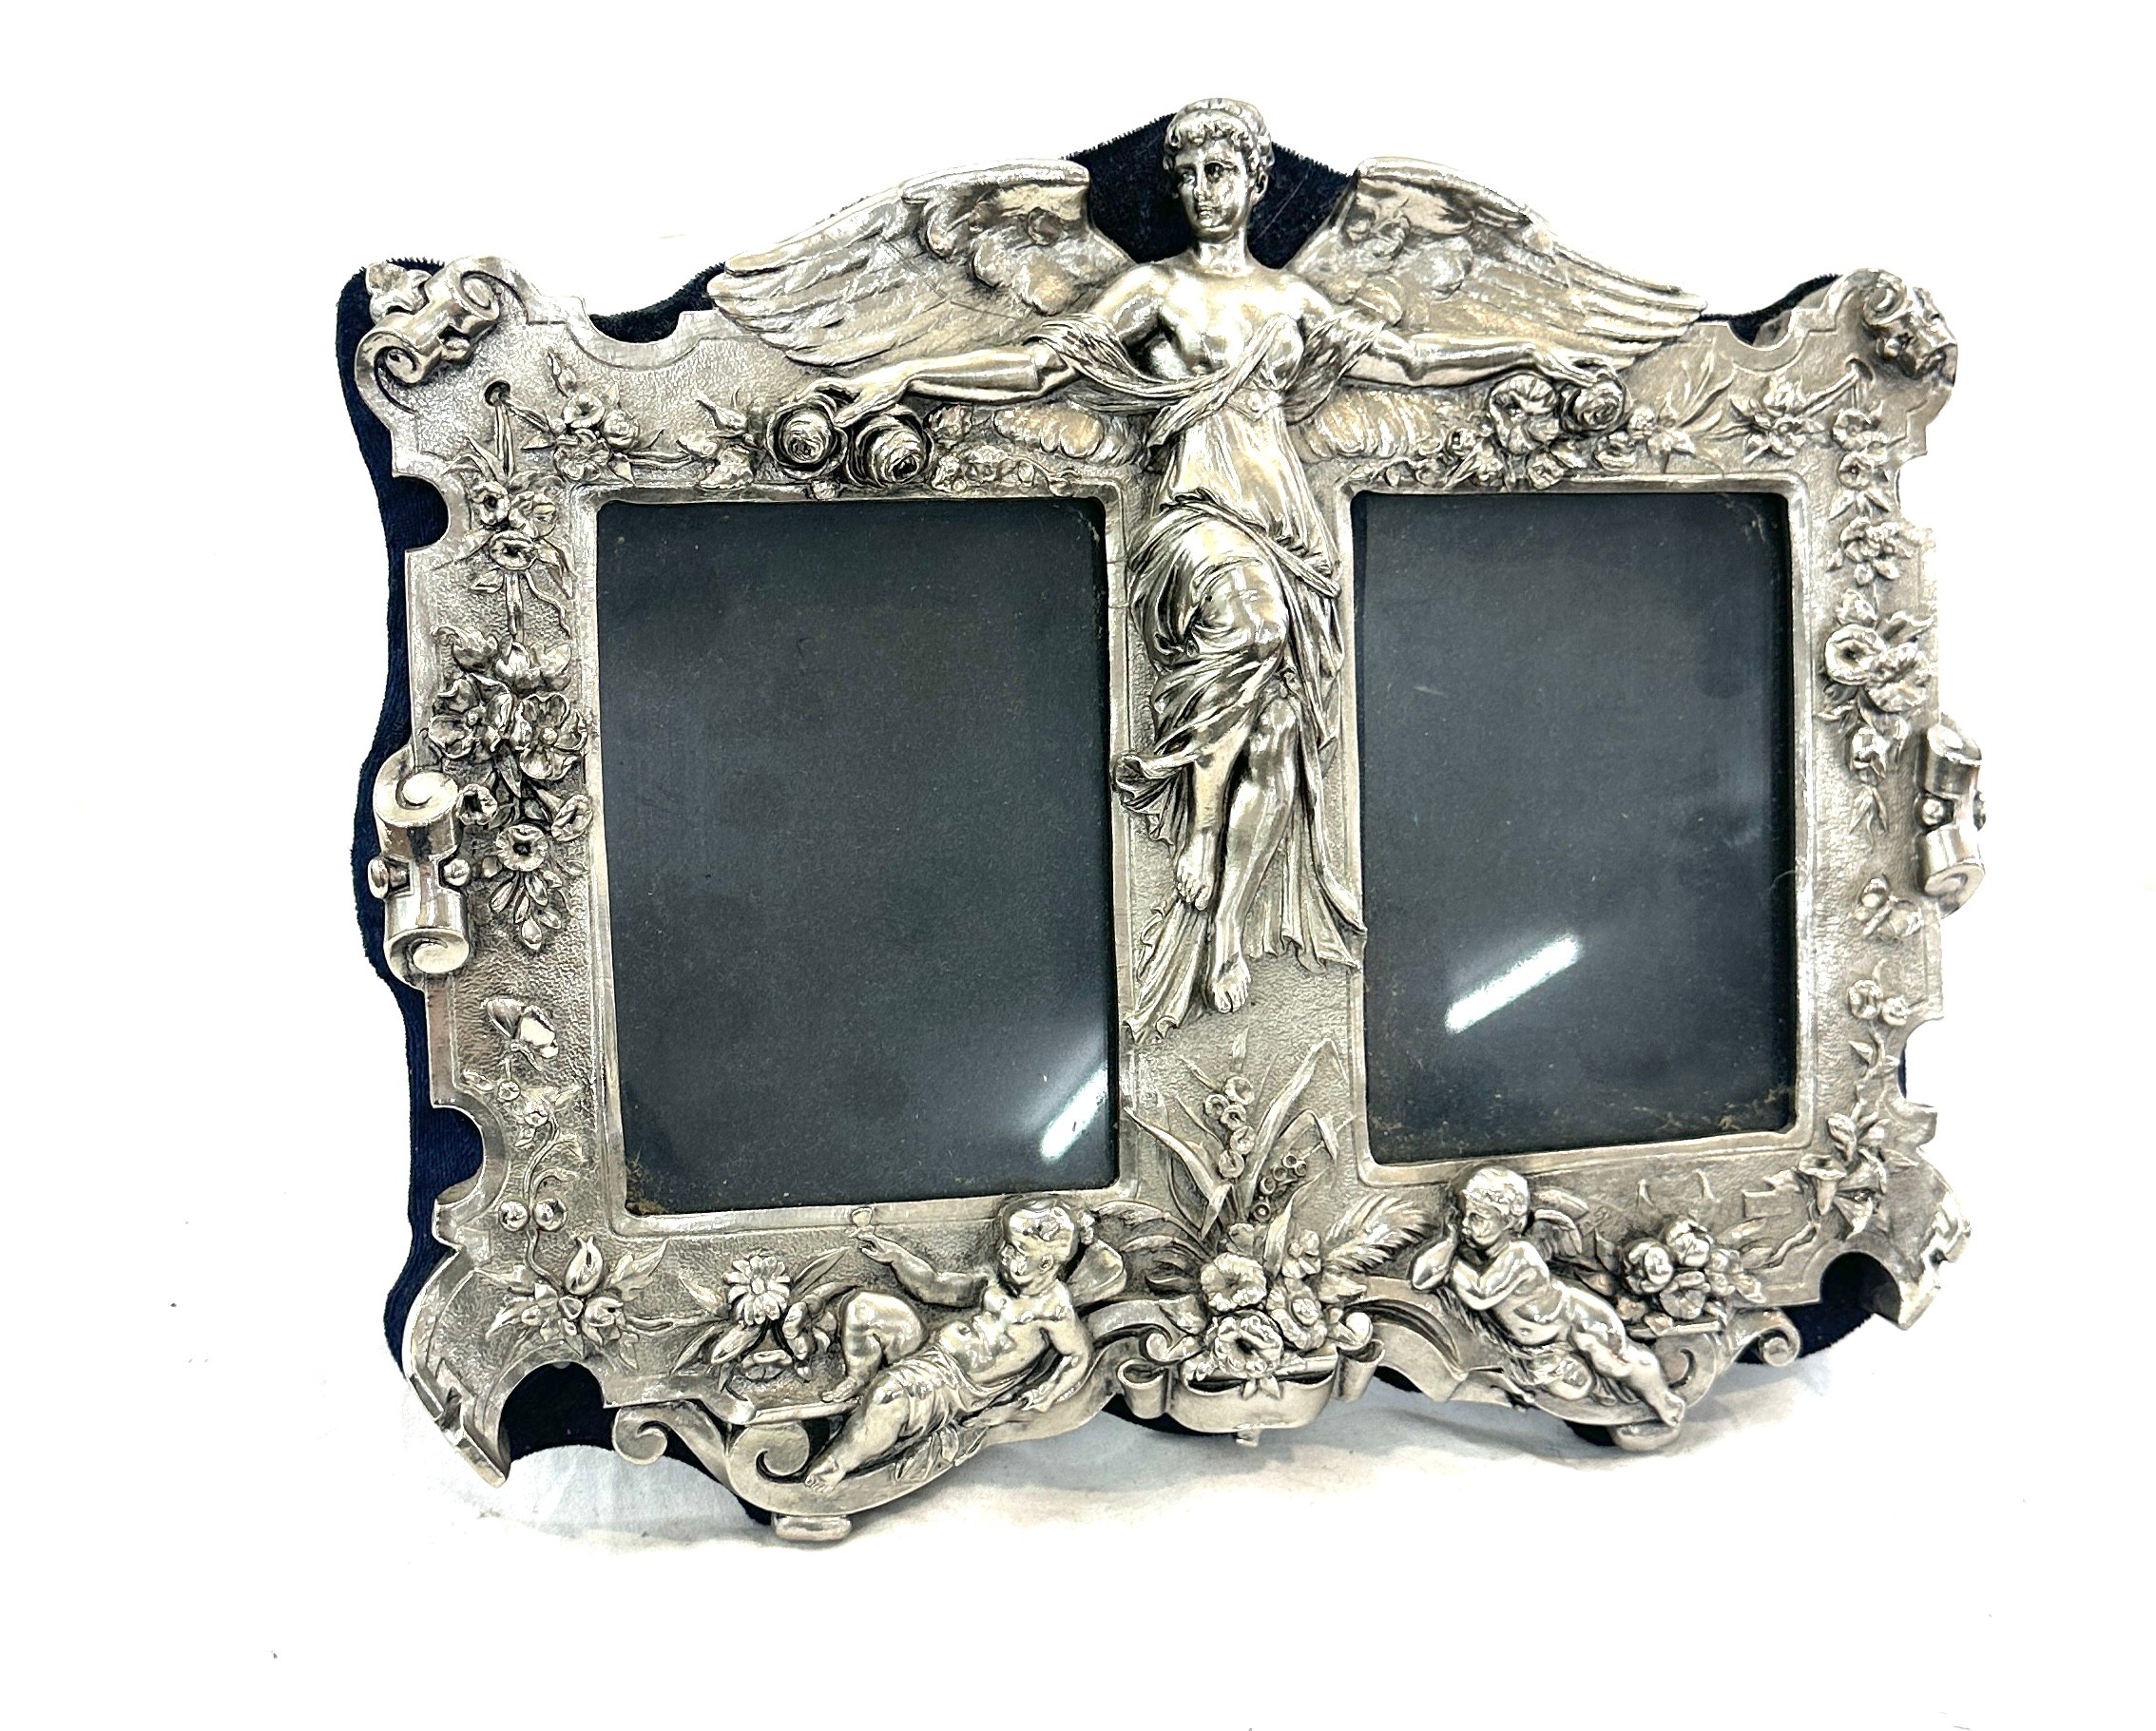 Large silver coloured double photo frame, approximate measurements: 13 x 11 inches